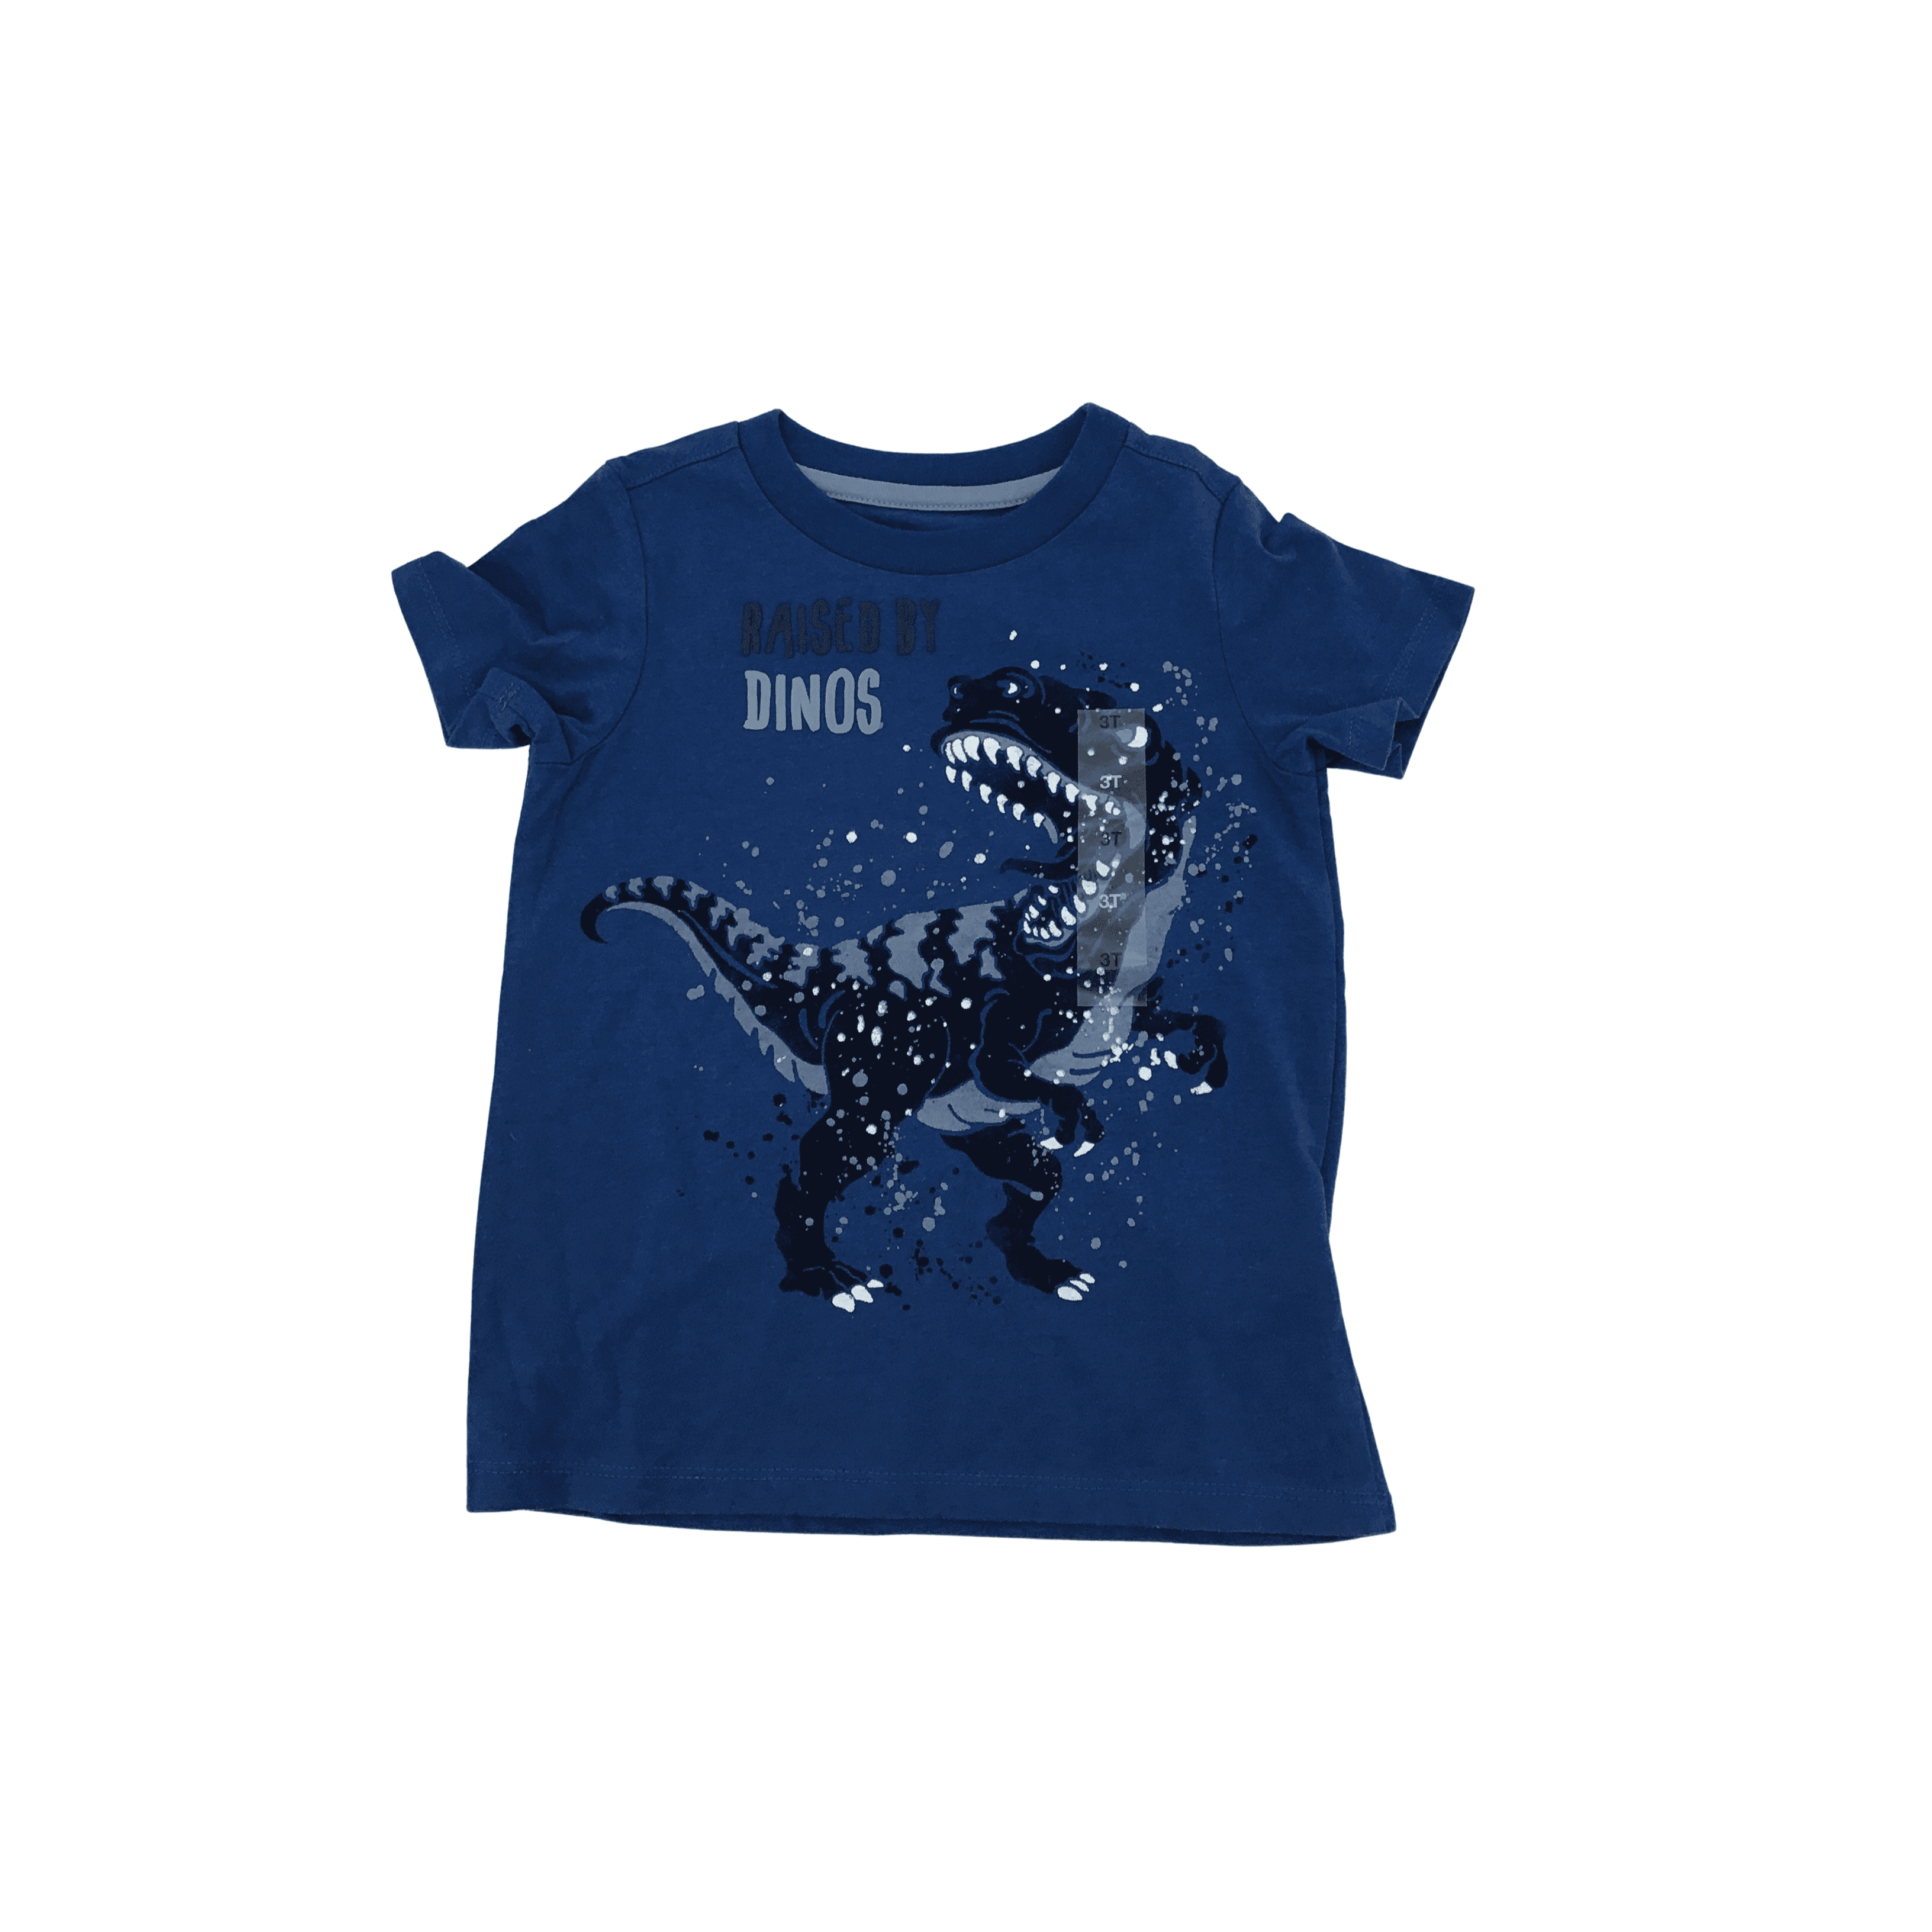 Epic Threads Boy's T-Shirt: Blue 3T" Raised By Dinos "